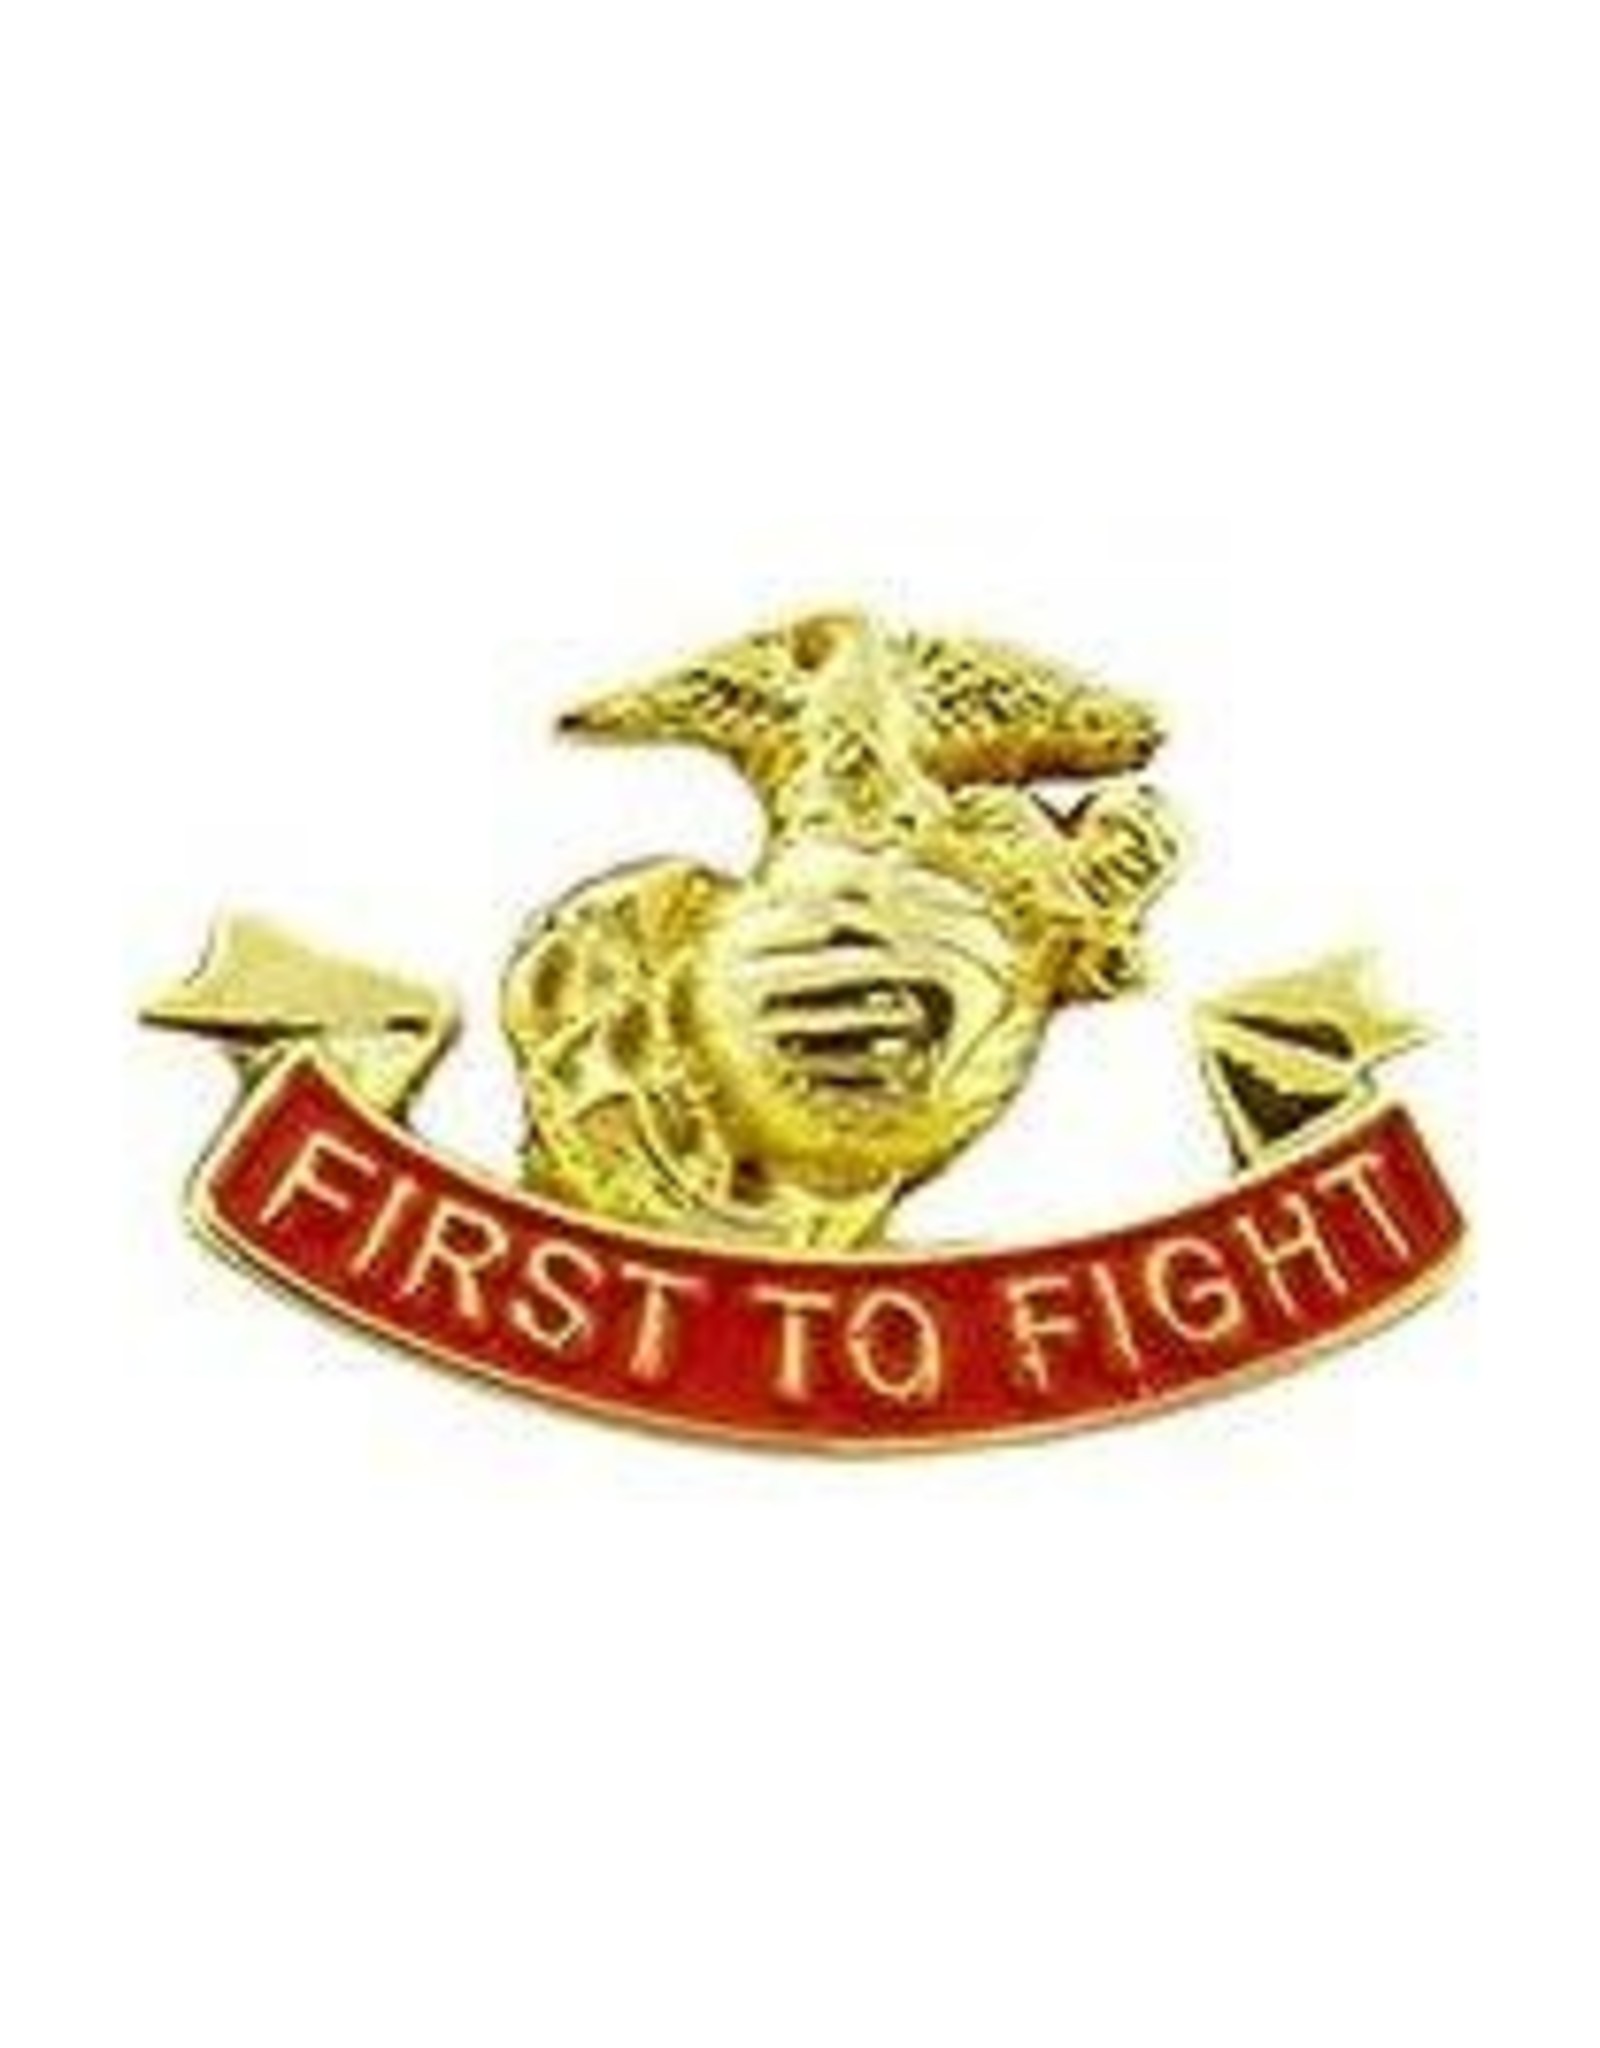 Pin - USMC First to Fight